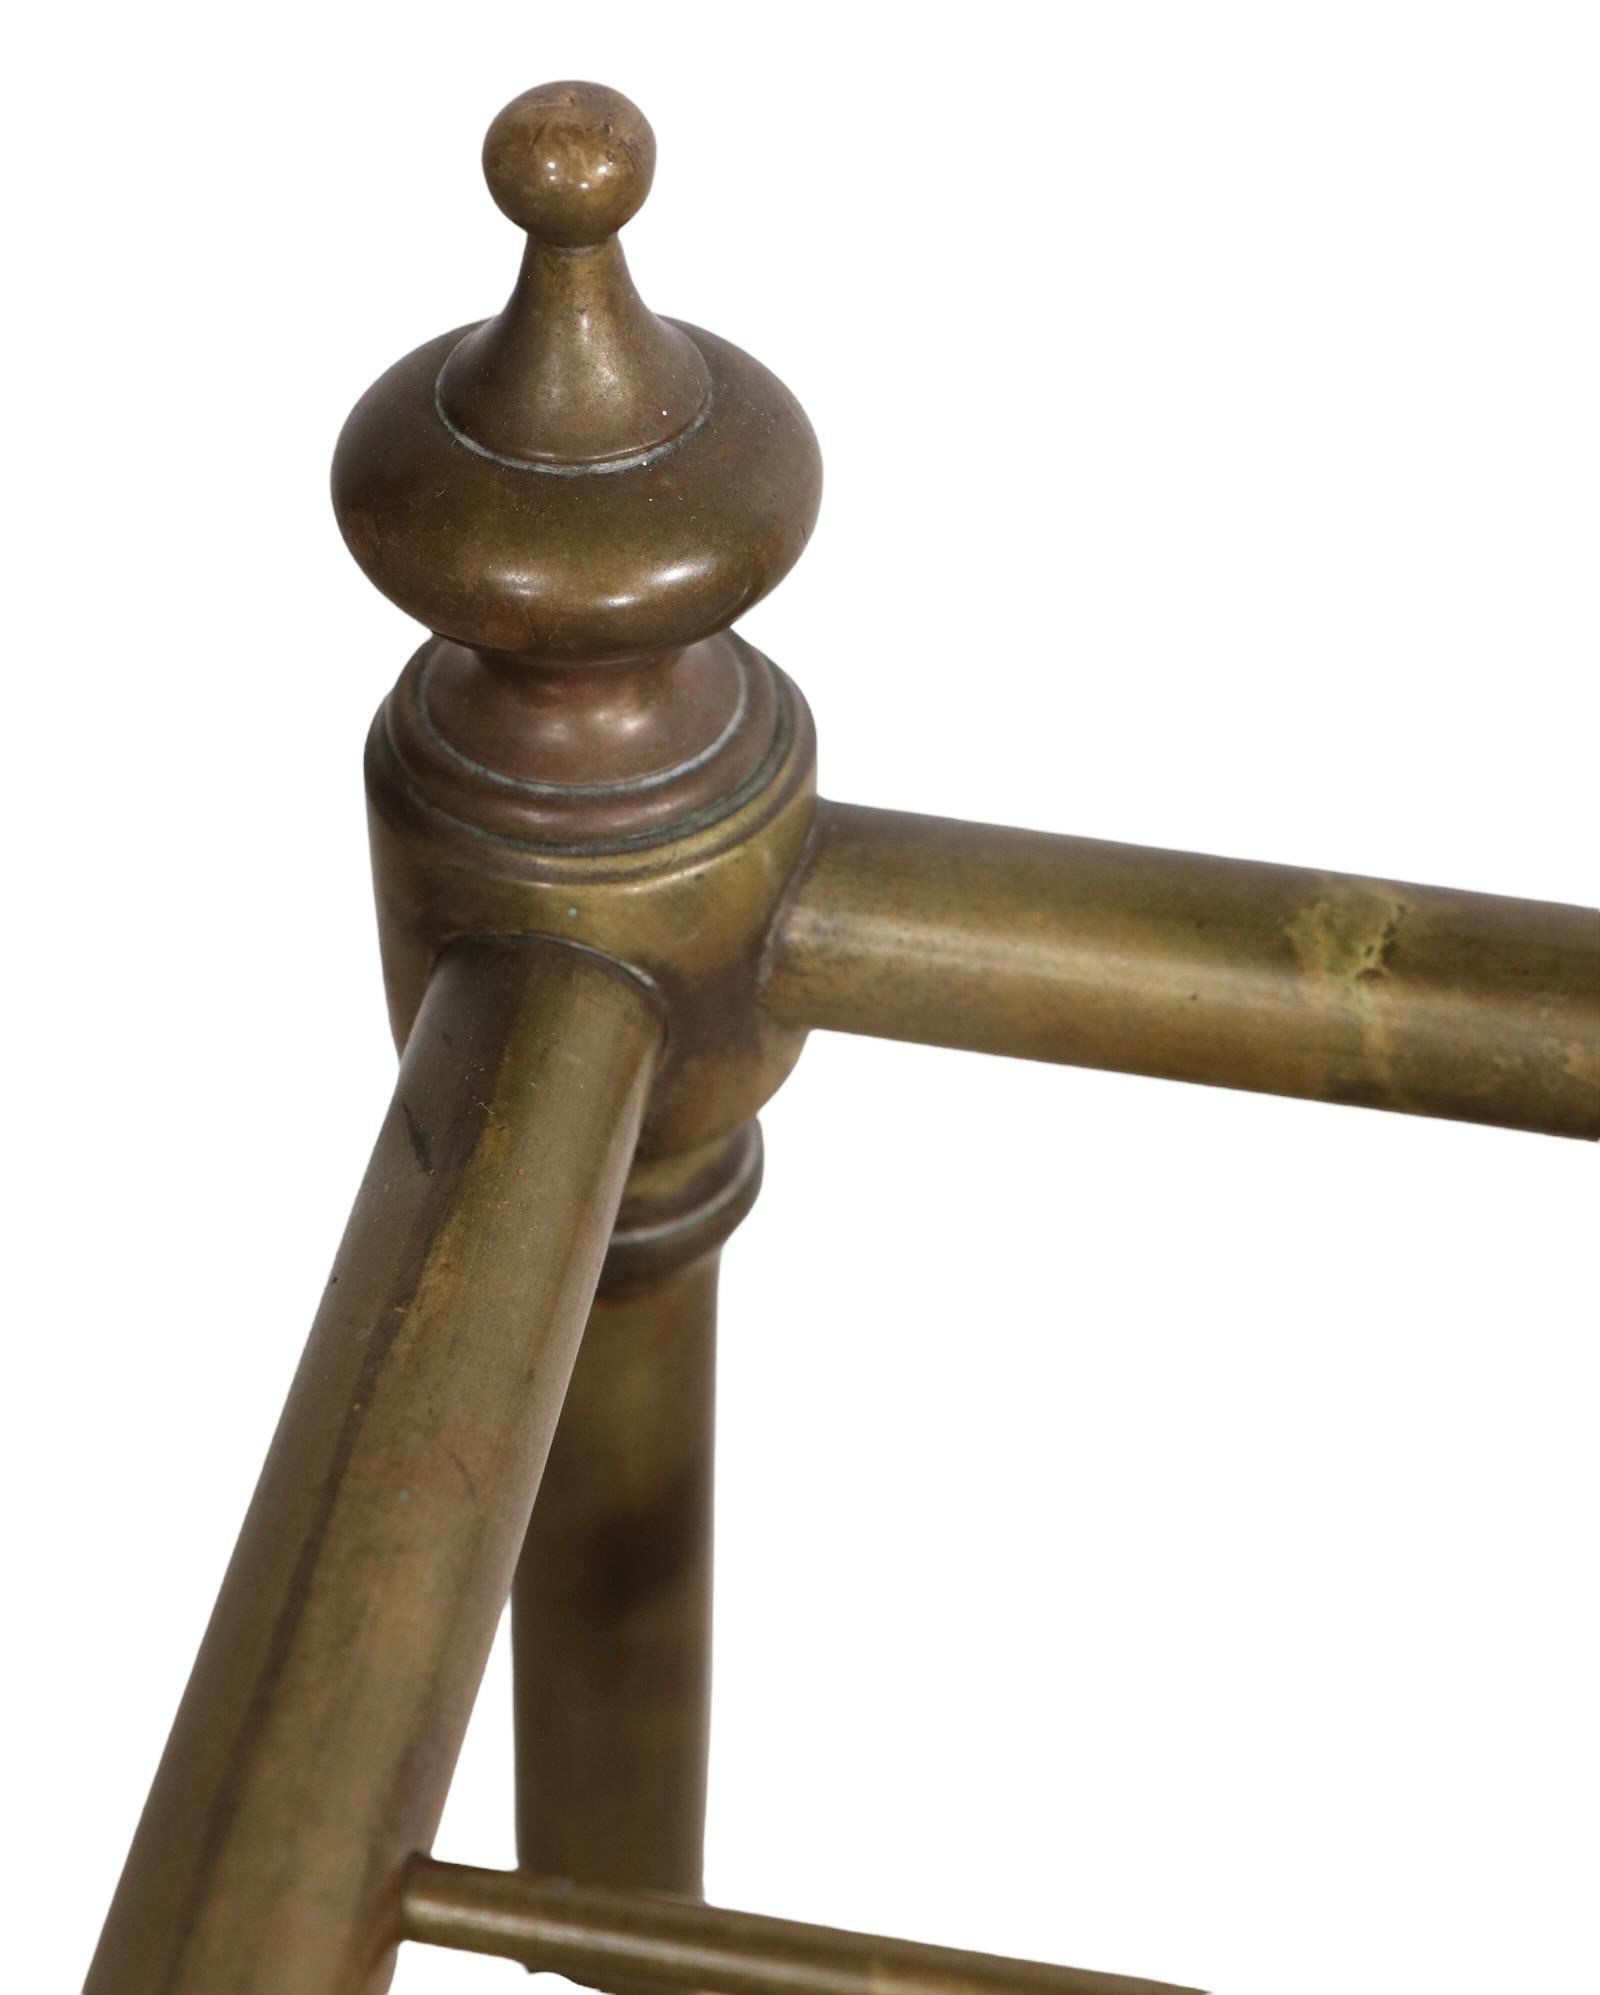 Well constructed, well designed and tasteful umbrella, cane holder rack, stand in brass and iron. This piece is solid, sturdy, clean, and ready to use, showing only light cosmetic wear, normal and consistent with age. Probably made in France, or